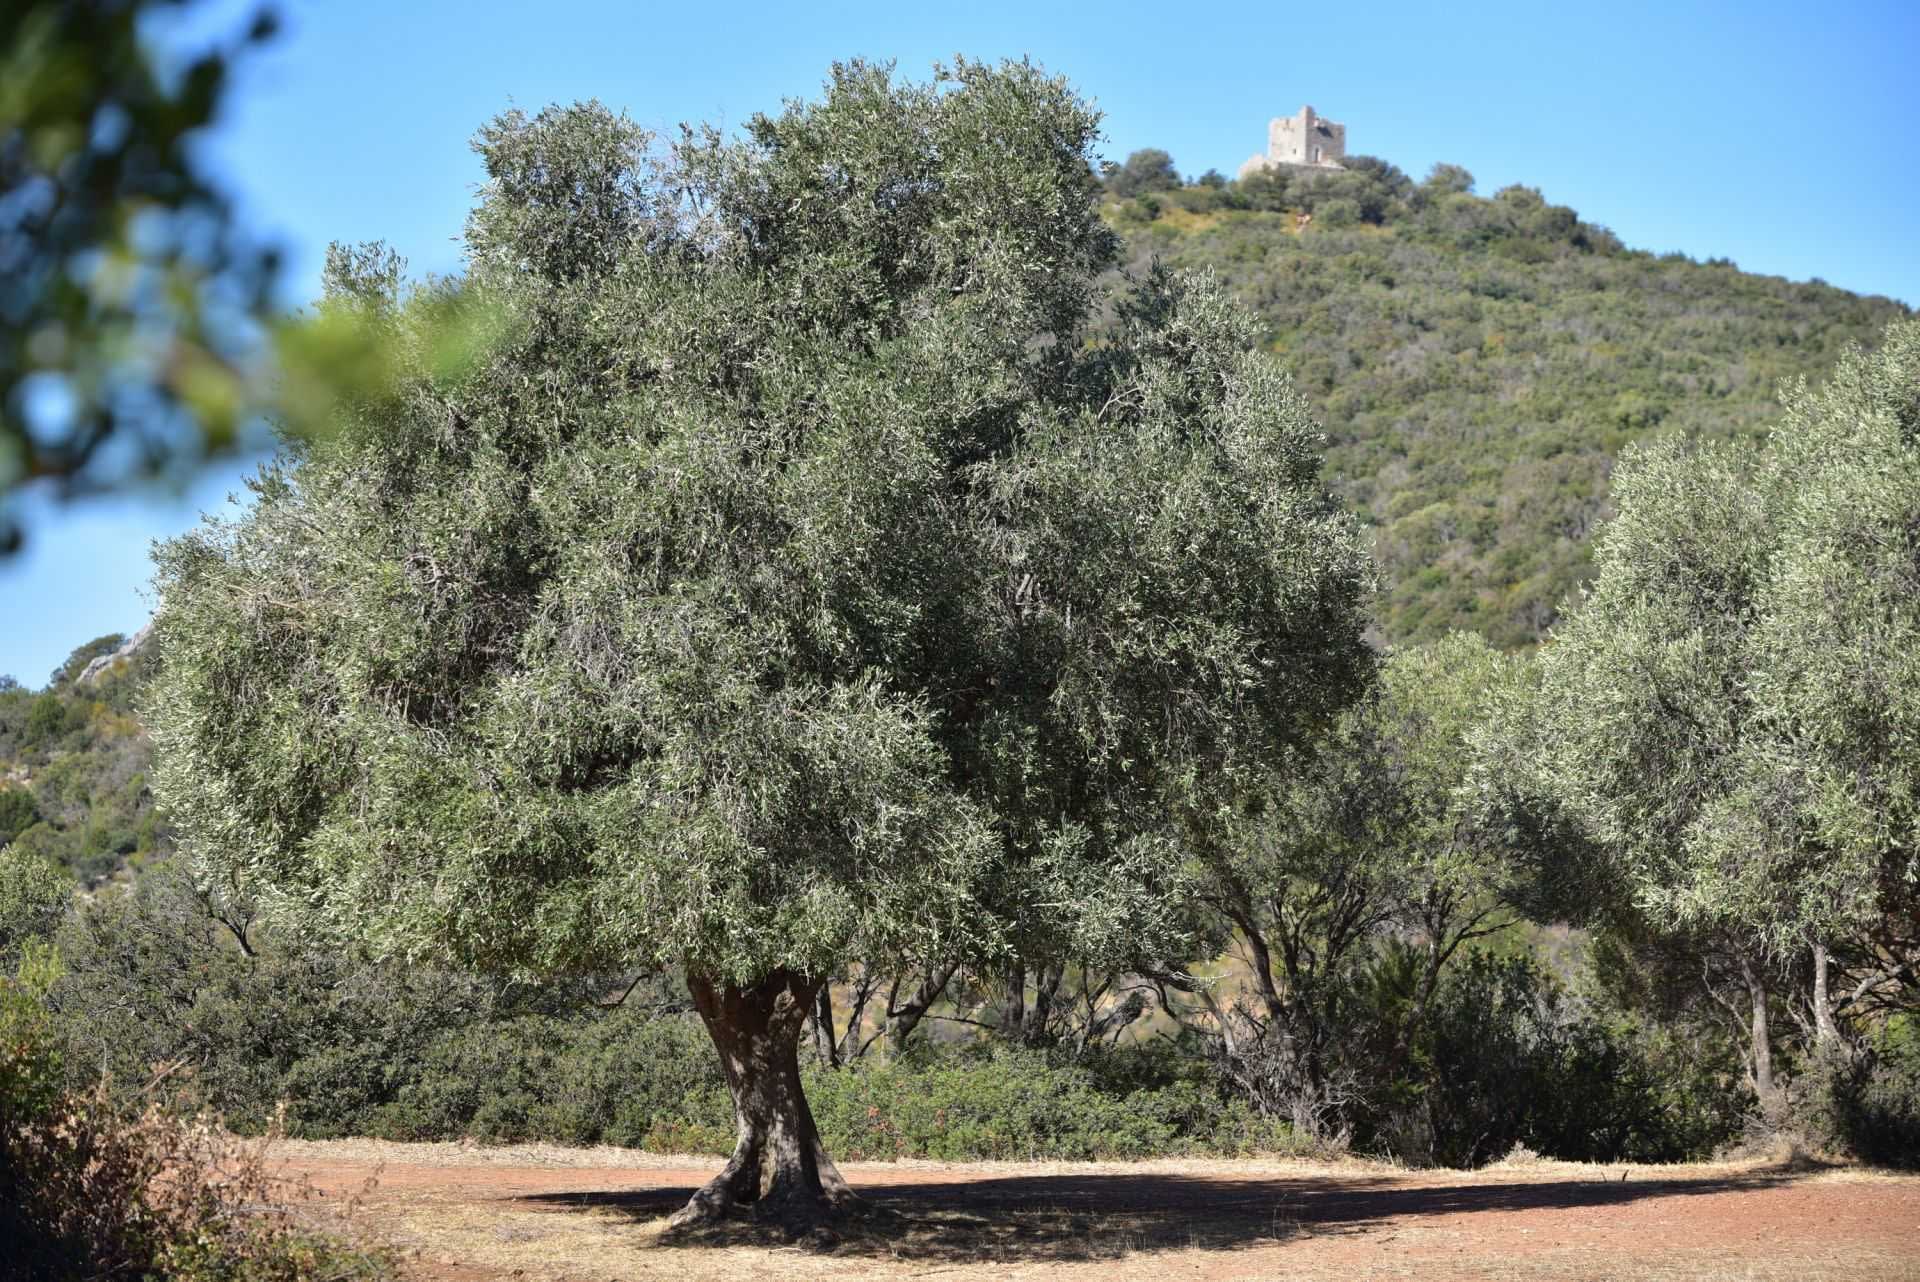 production-business-europe-social-farming-initiatives-in-italy-focus-on-environment-inclusion-olive-oil-times